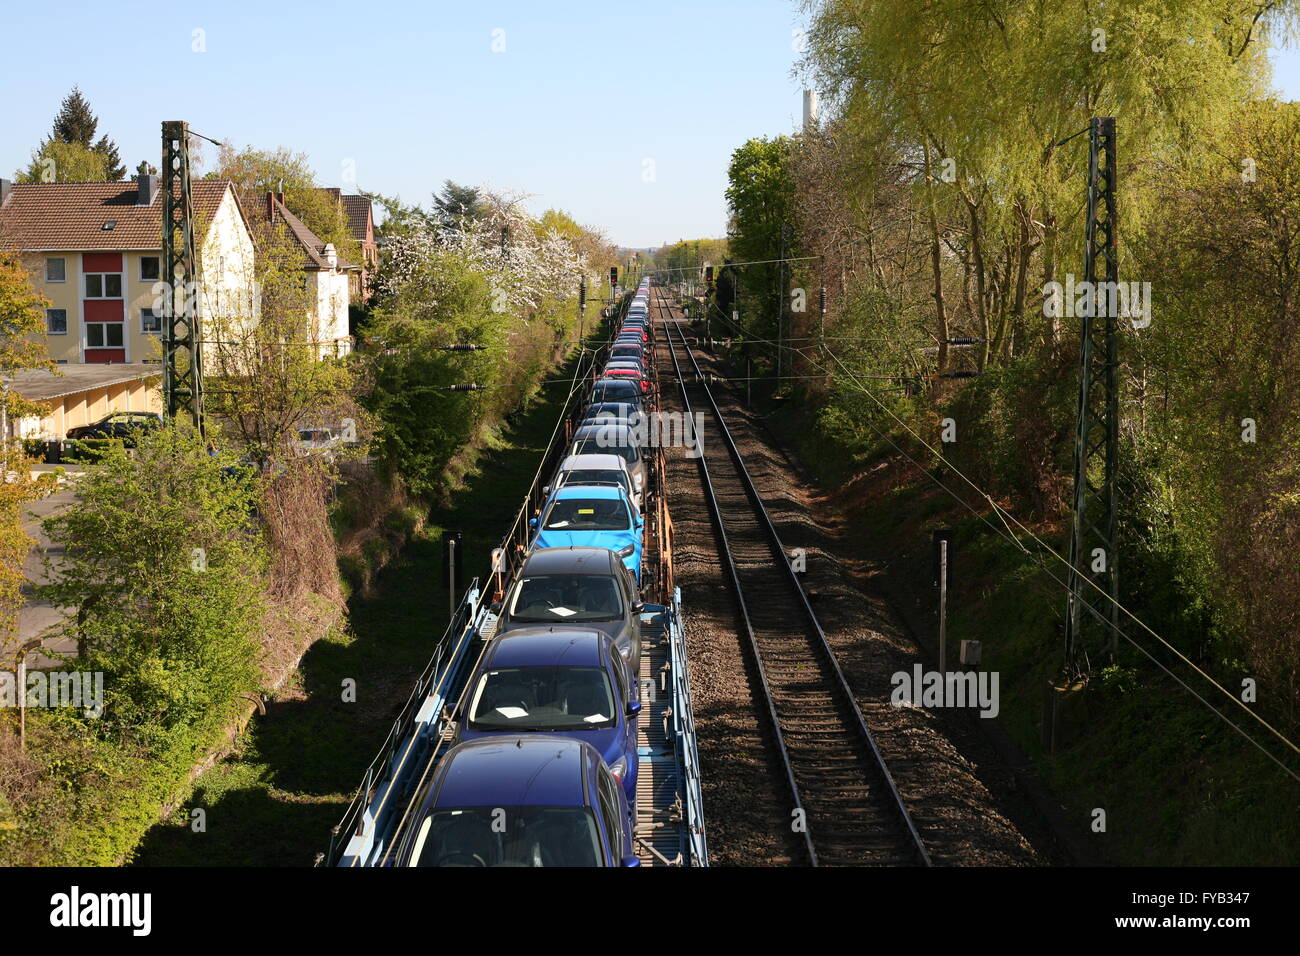 freight train with cars, in Bonn, Germany Stock Photo